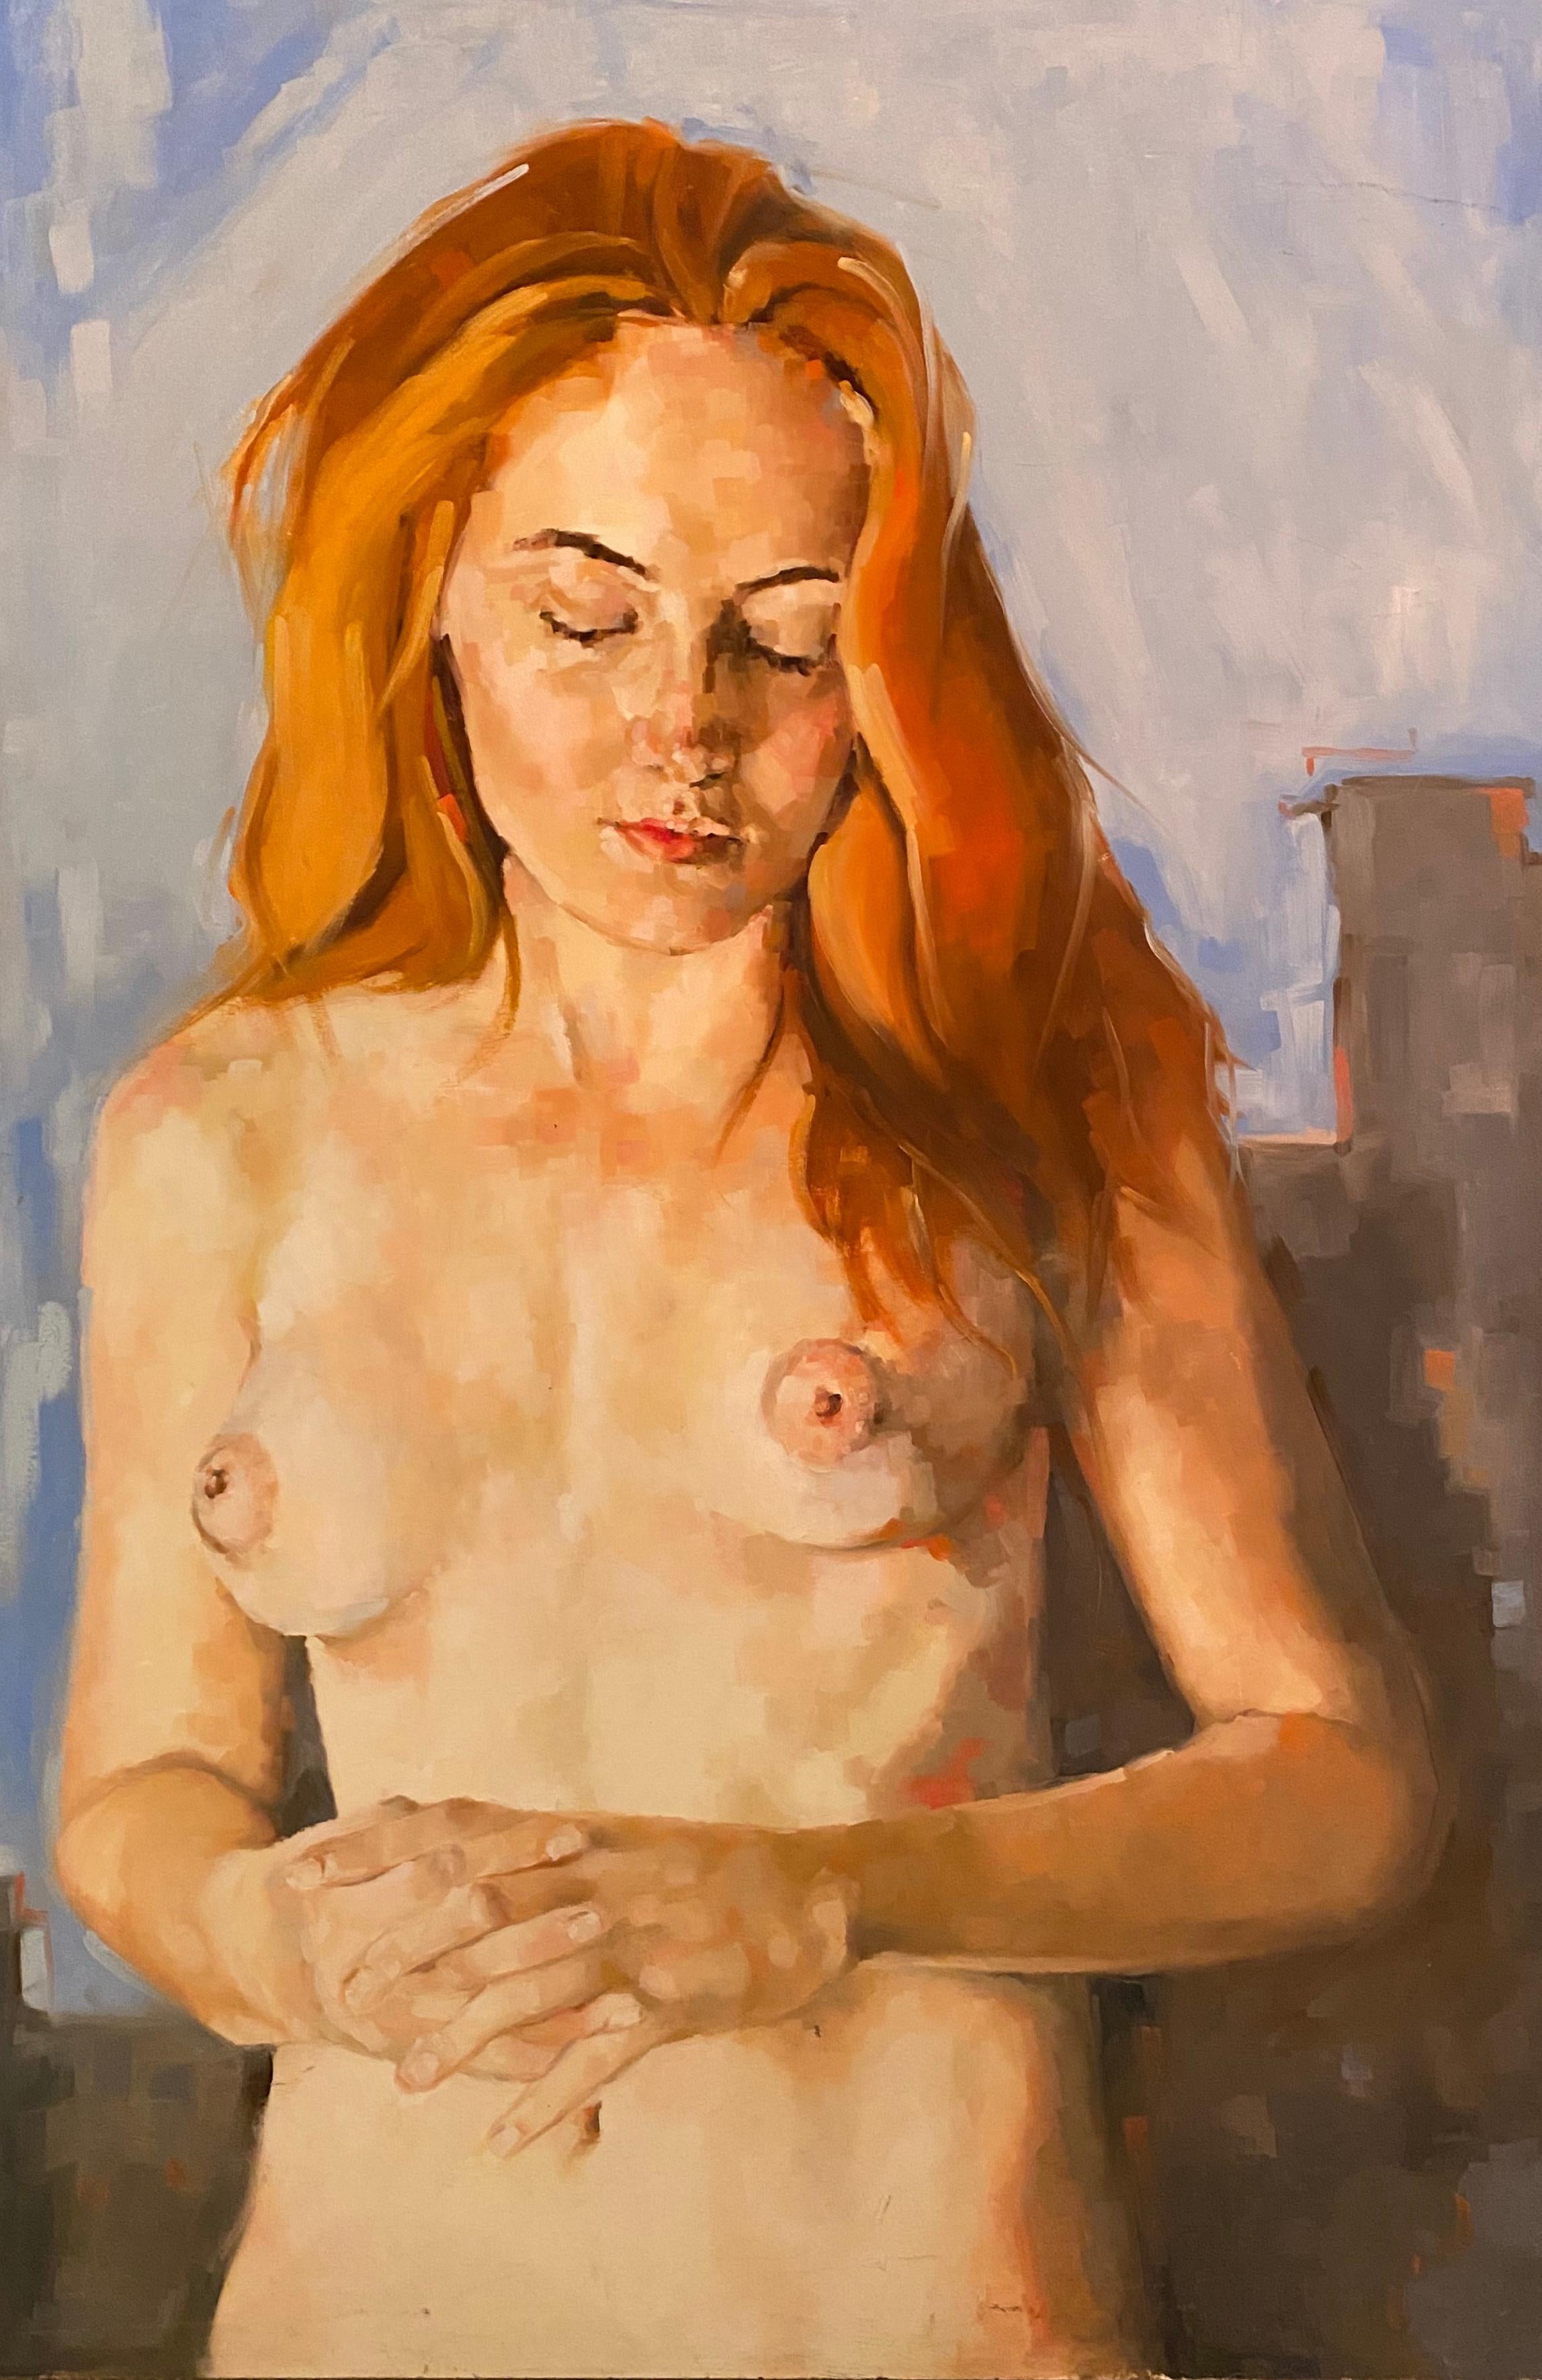 Shana Wilson Nude Painting - ‘Young Woman With Red Hair’ Figurative Nude  Female Model Oil on Board by Shana 